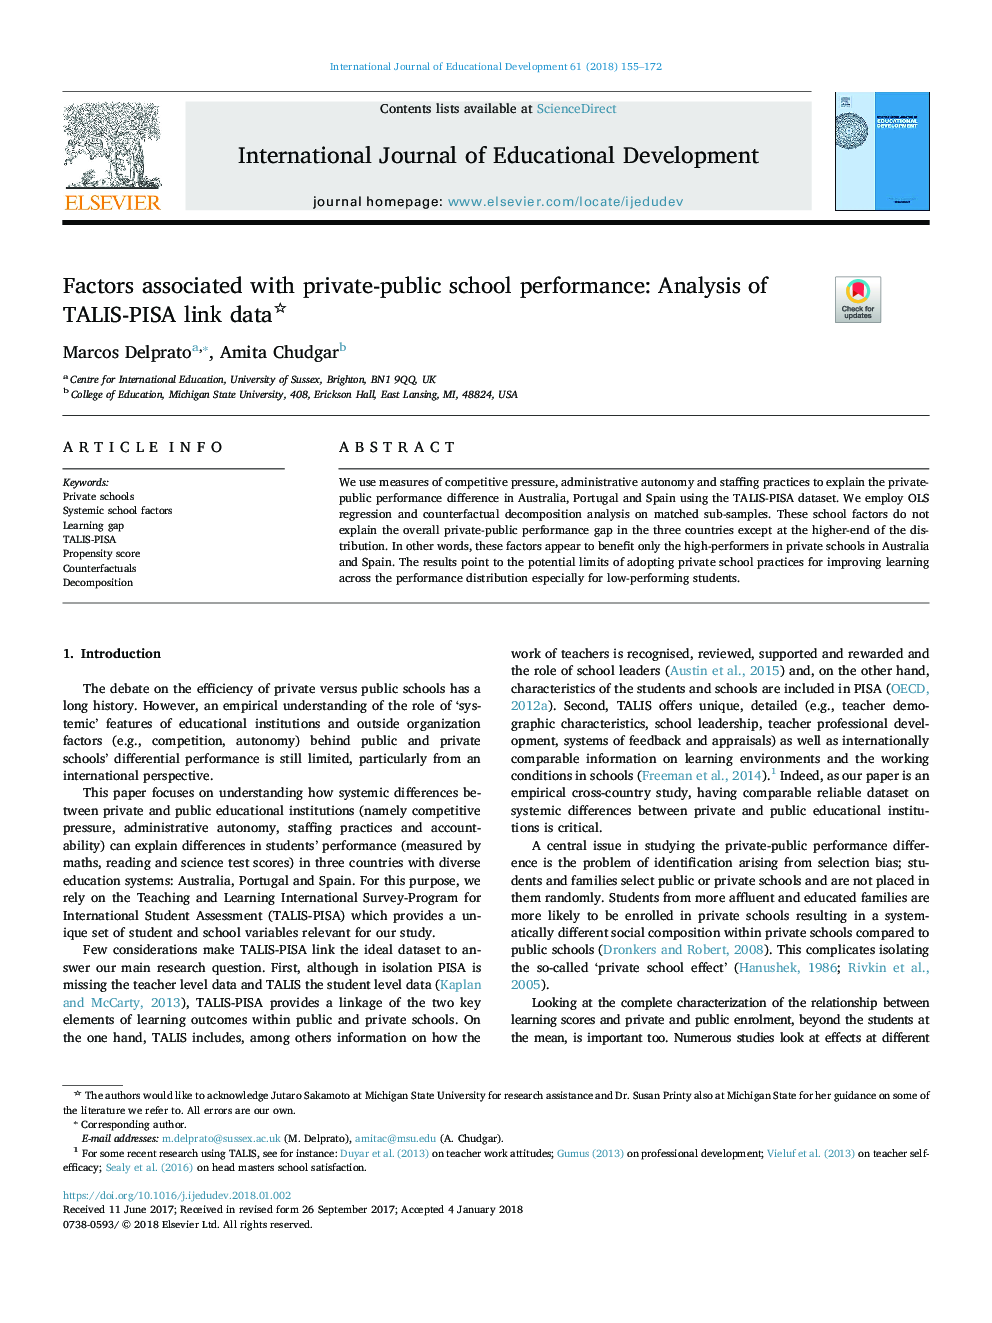 Factors associated with private-public school performance: Analysis of TALIS-PISA link data